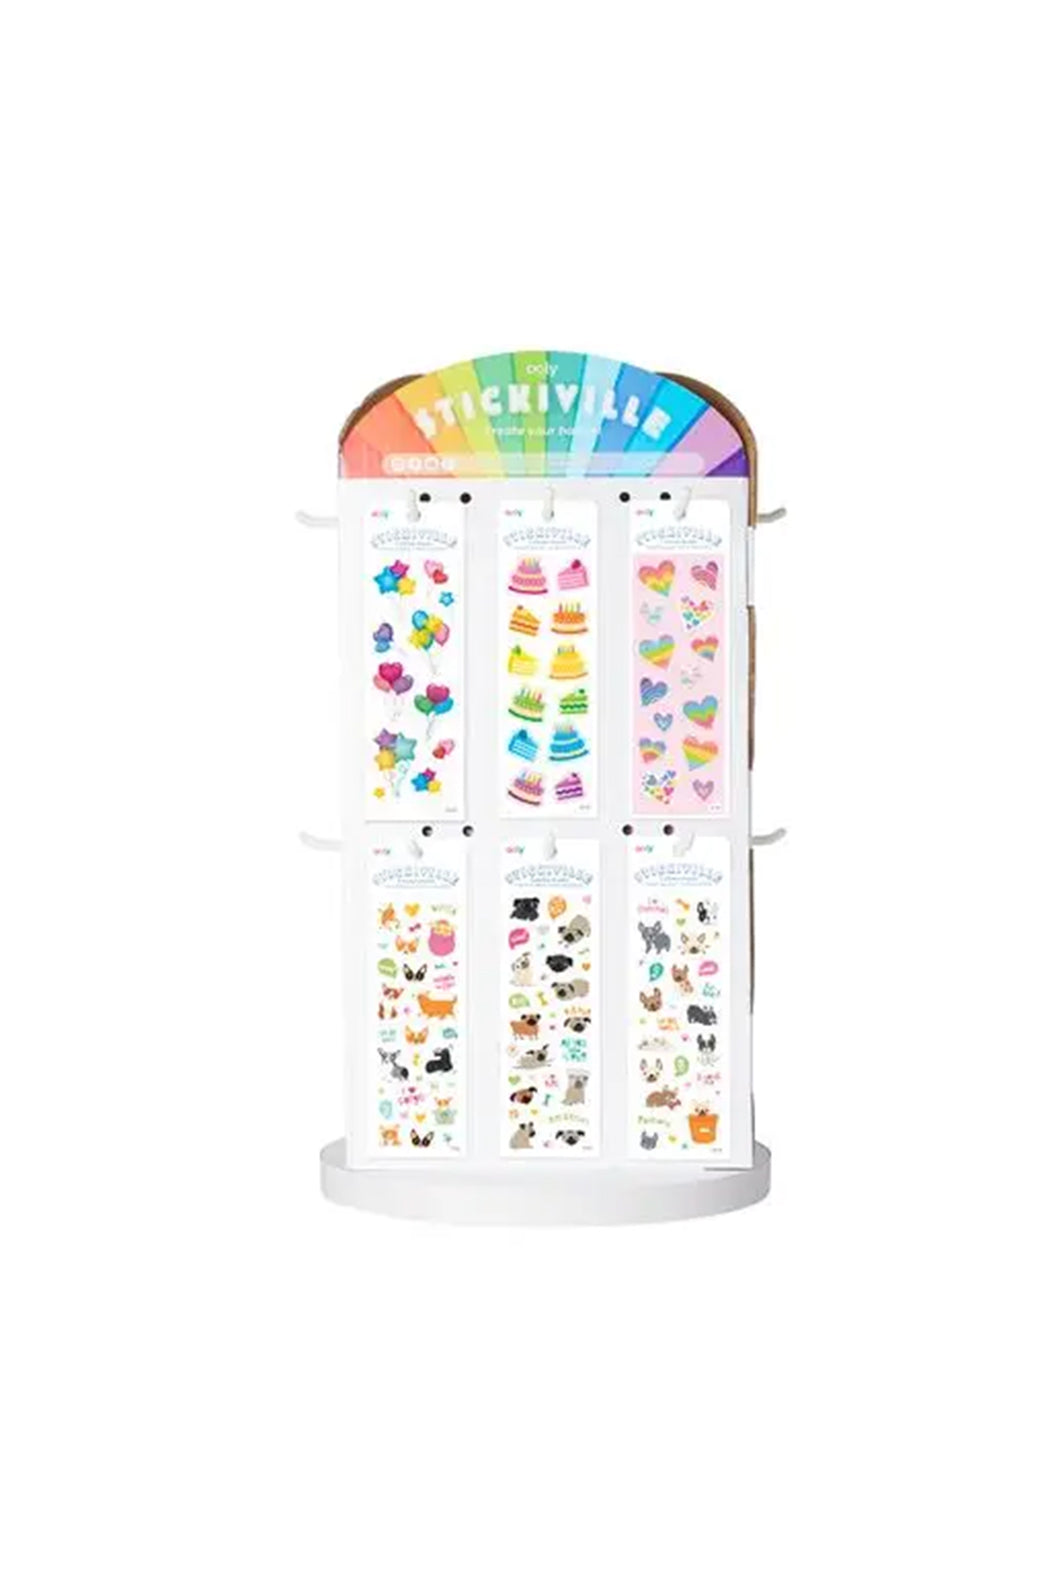 Pen + Gear 40-Page Sticker Book, Makin' Waves Edition, 2600+ Multicolored  Multi-Pattern Stickers, Everyday Use